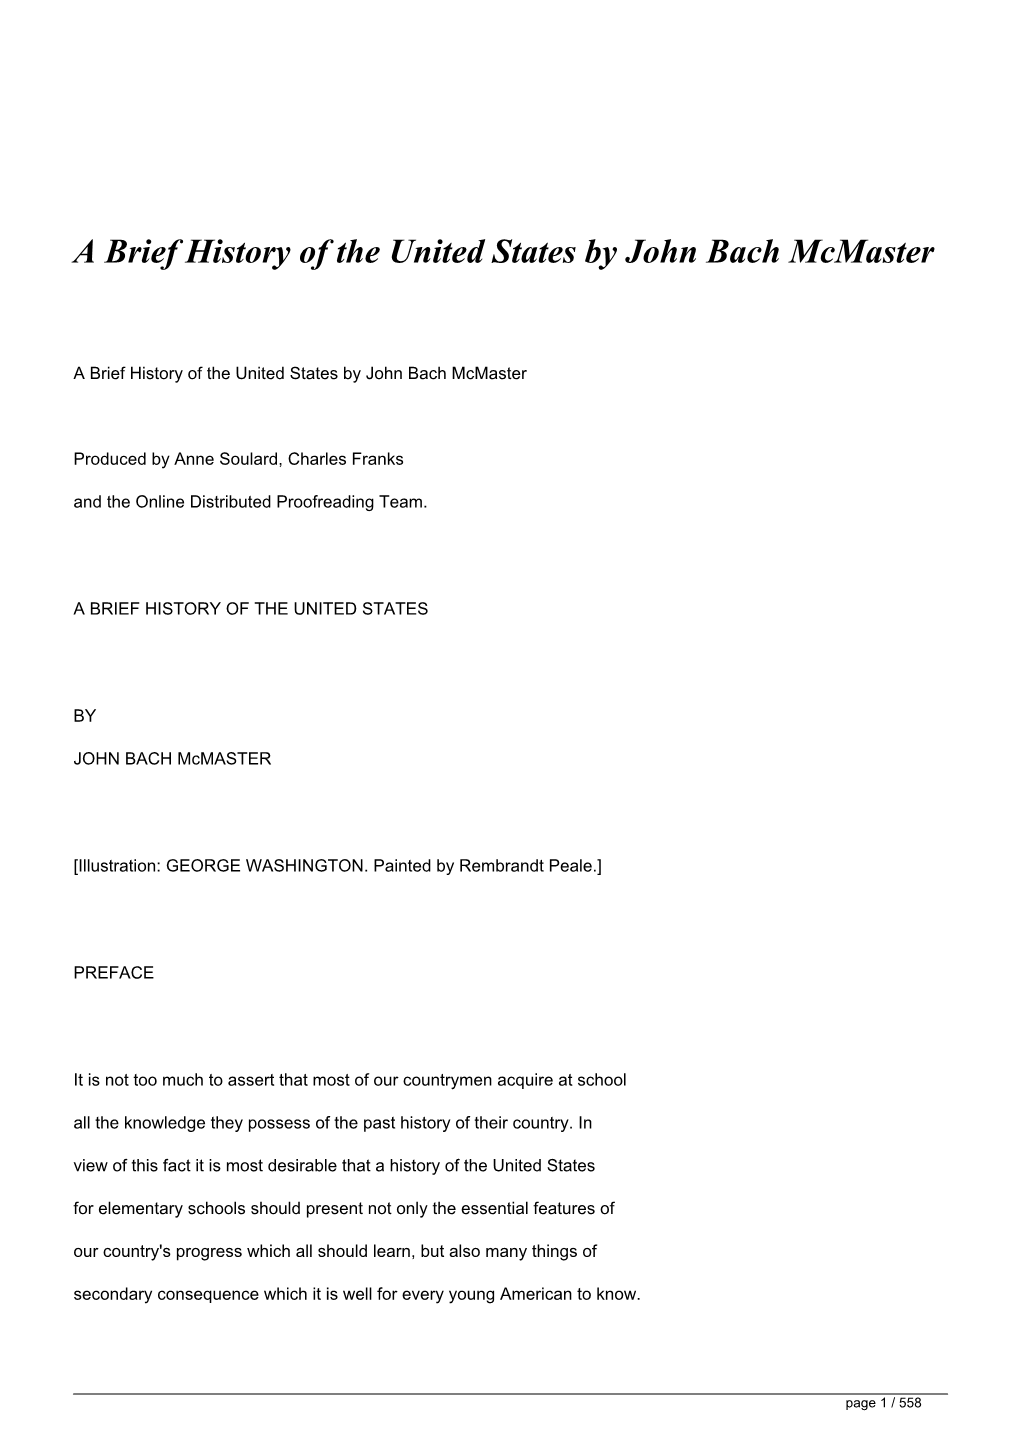 A Brief History of the United States by John Bach Mcmaster